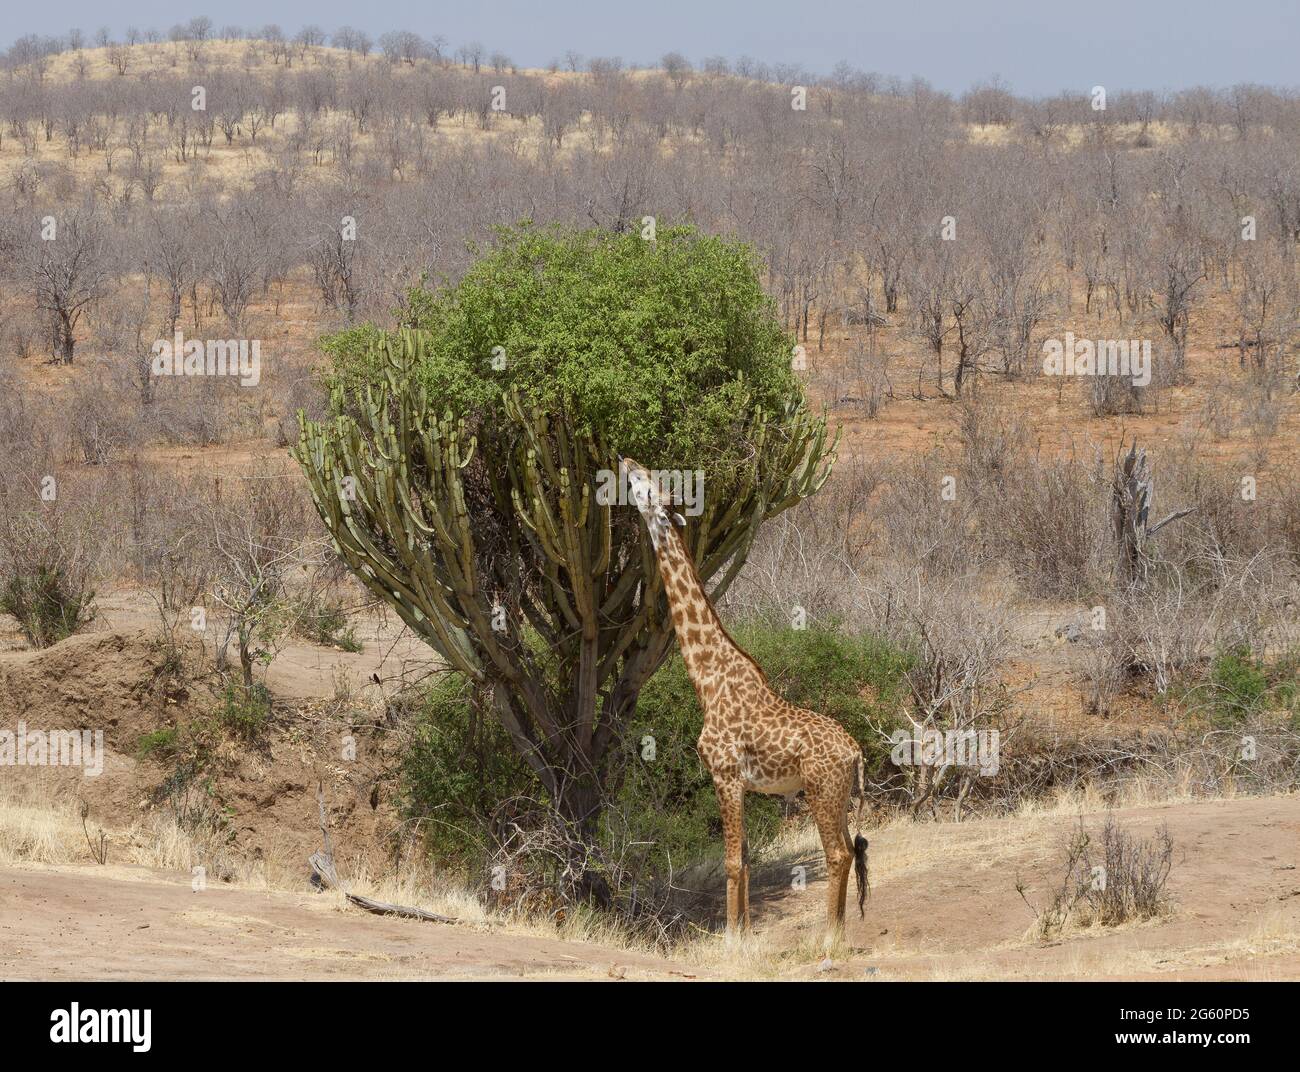 A Masai giraffe stretches its neck up to eat from a Candelabra tree. Stock Photo